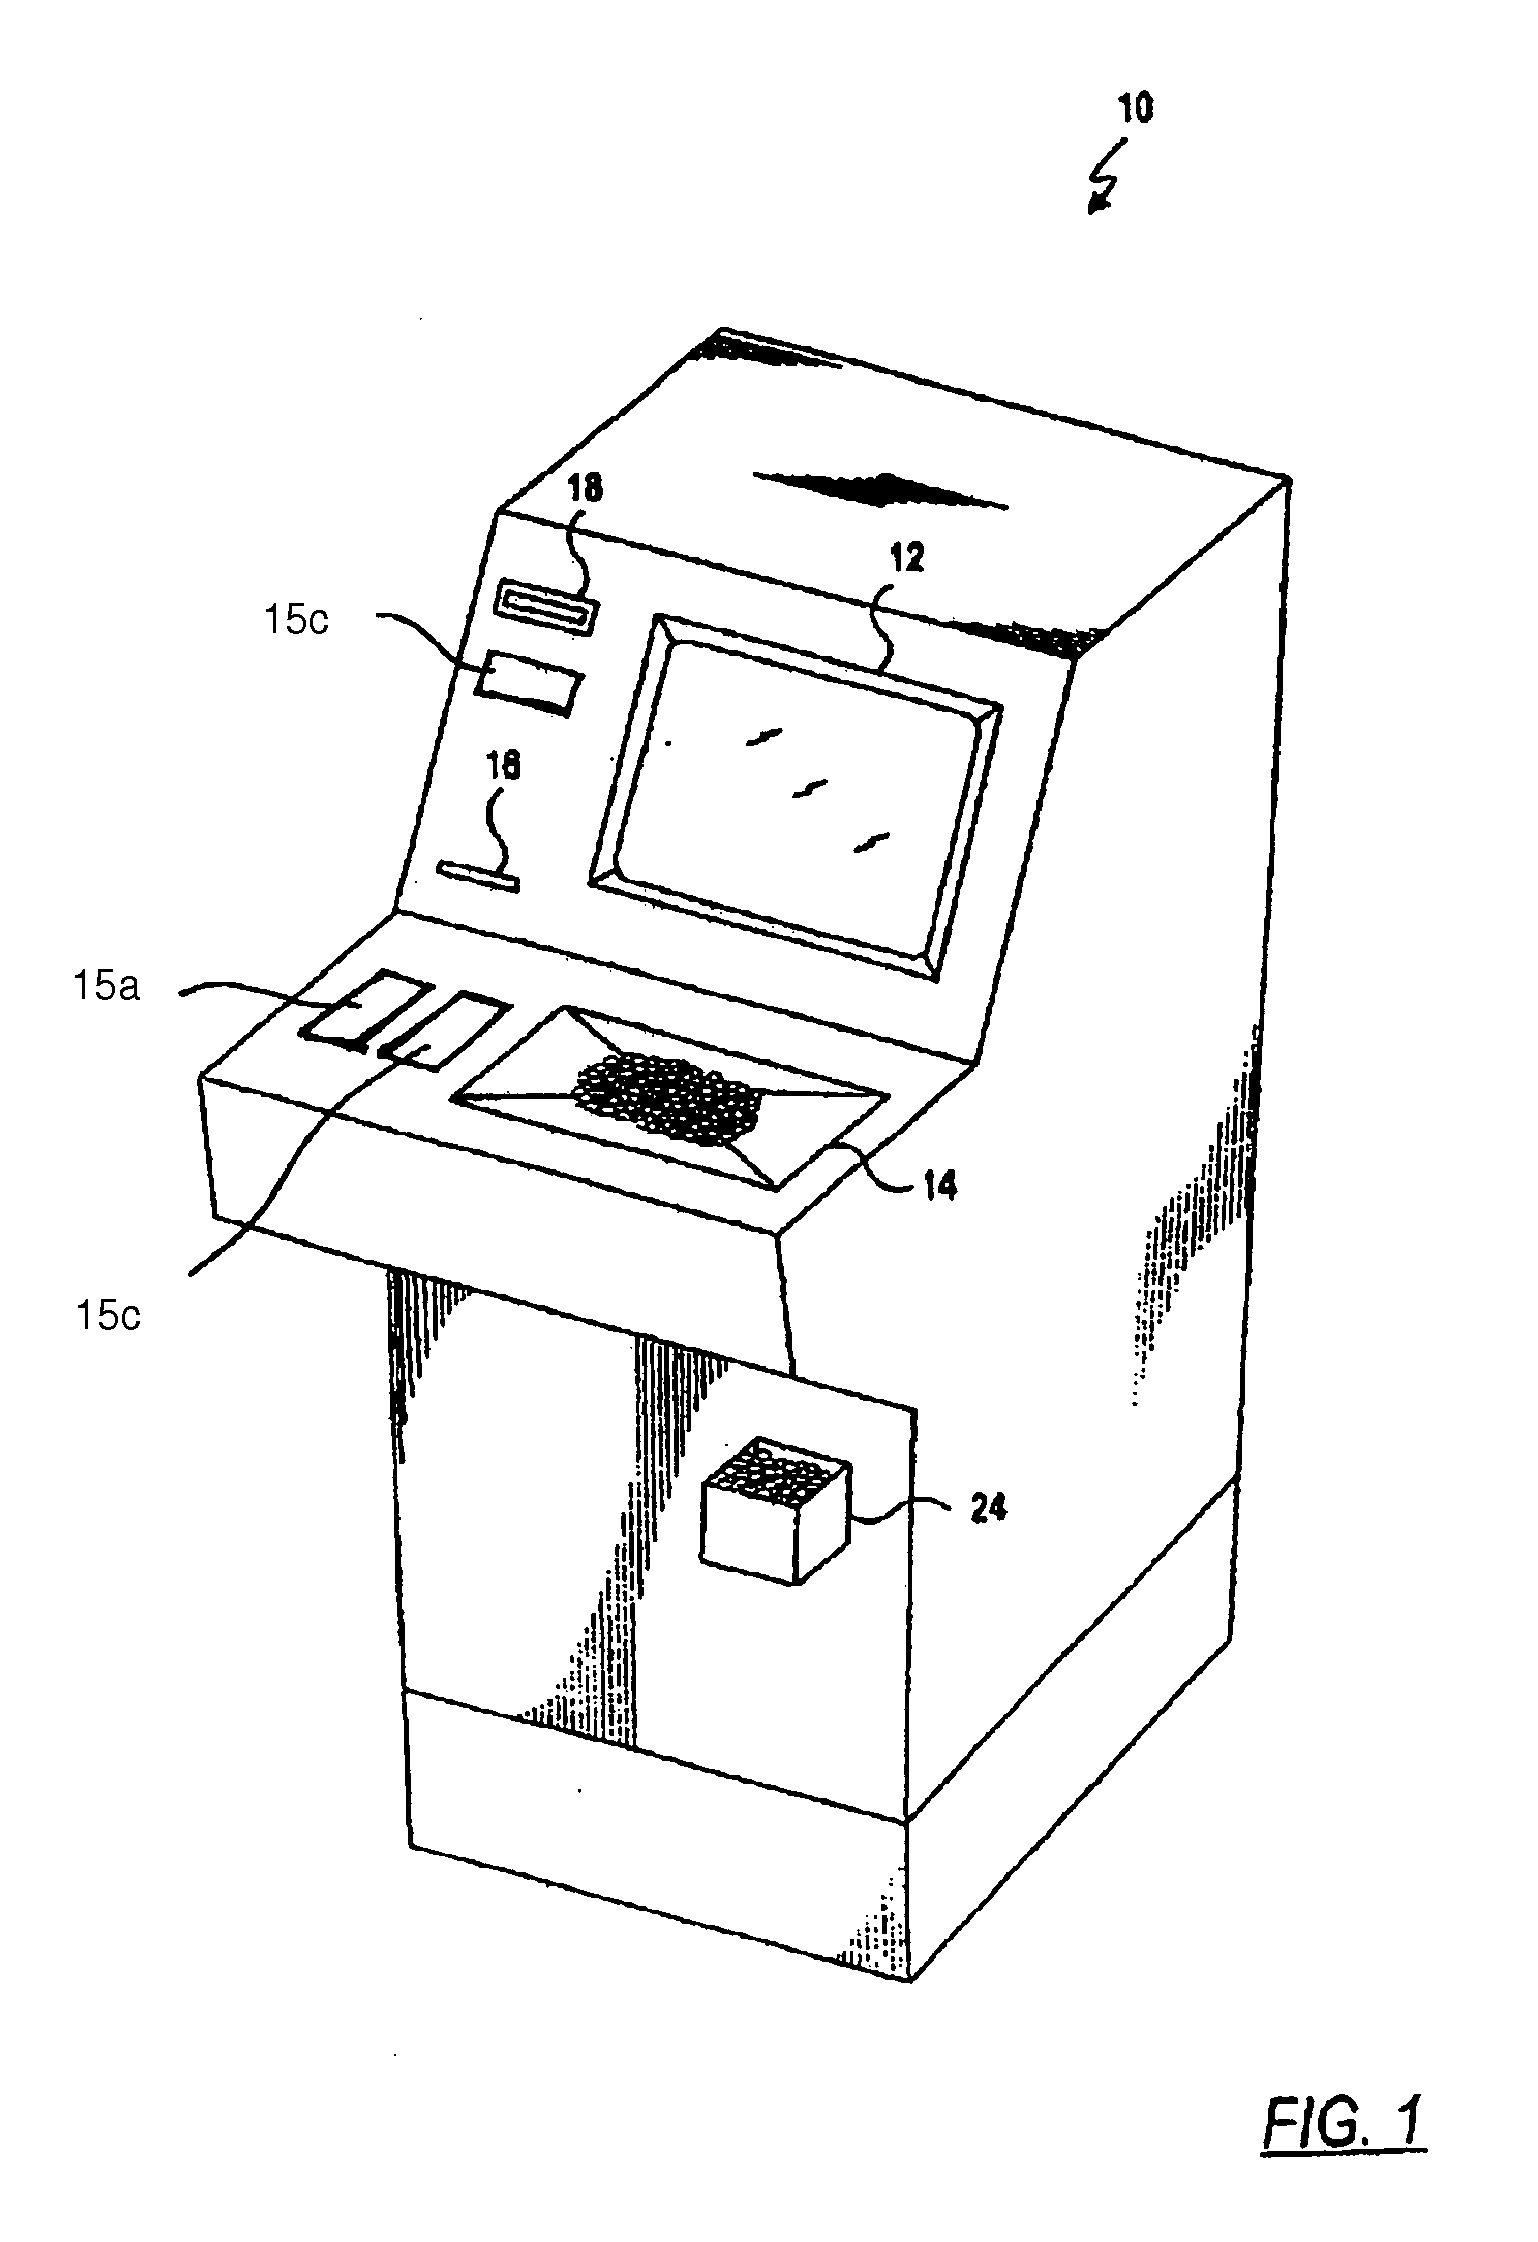 Systems, apparatus, and methods for currency processing control and redemption